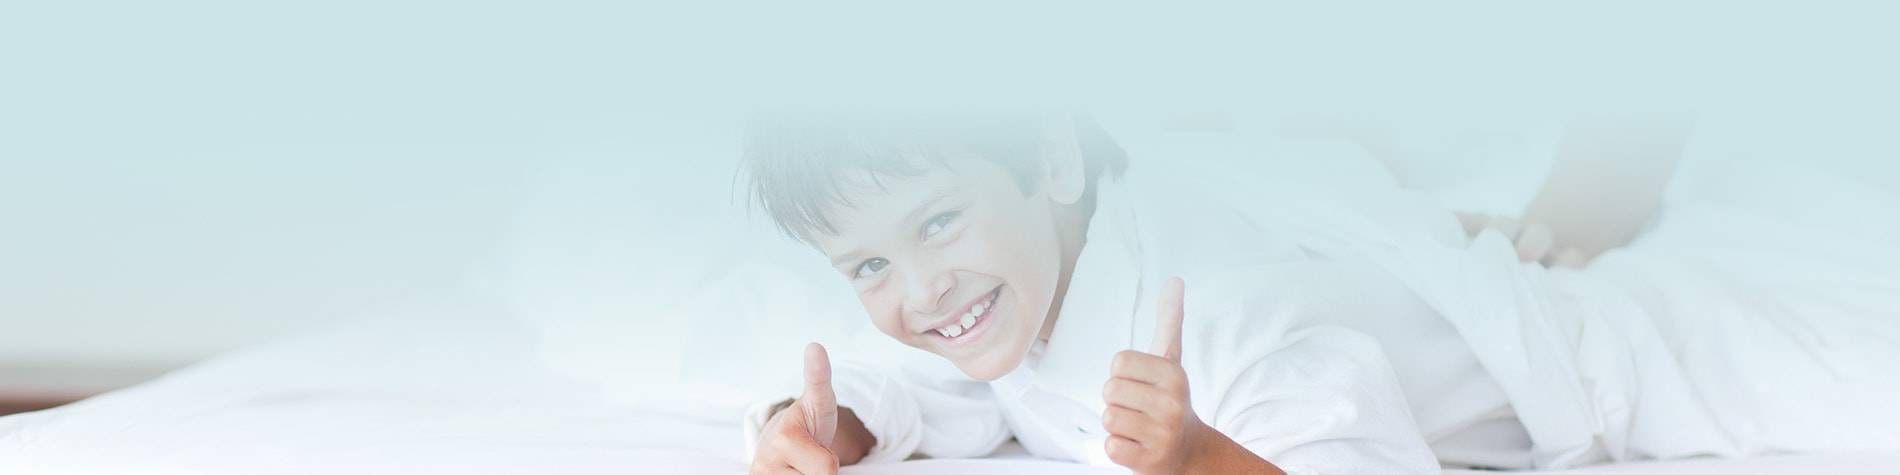 a boy making a thumbs up and smile